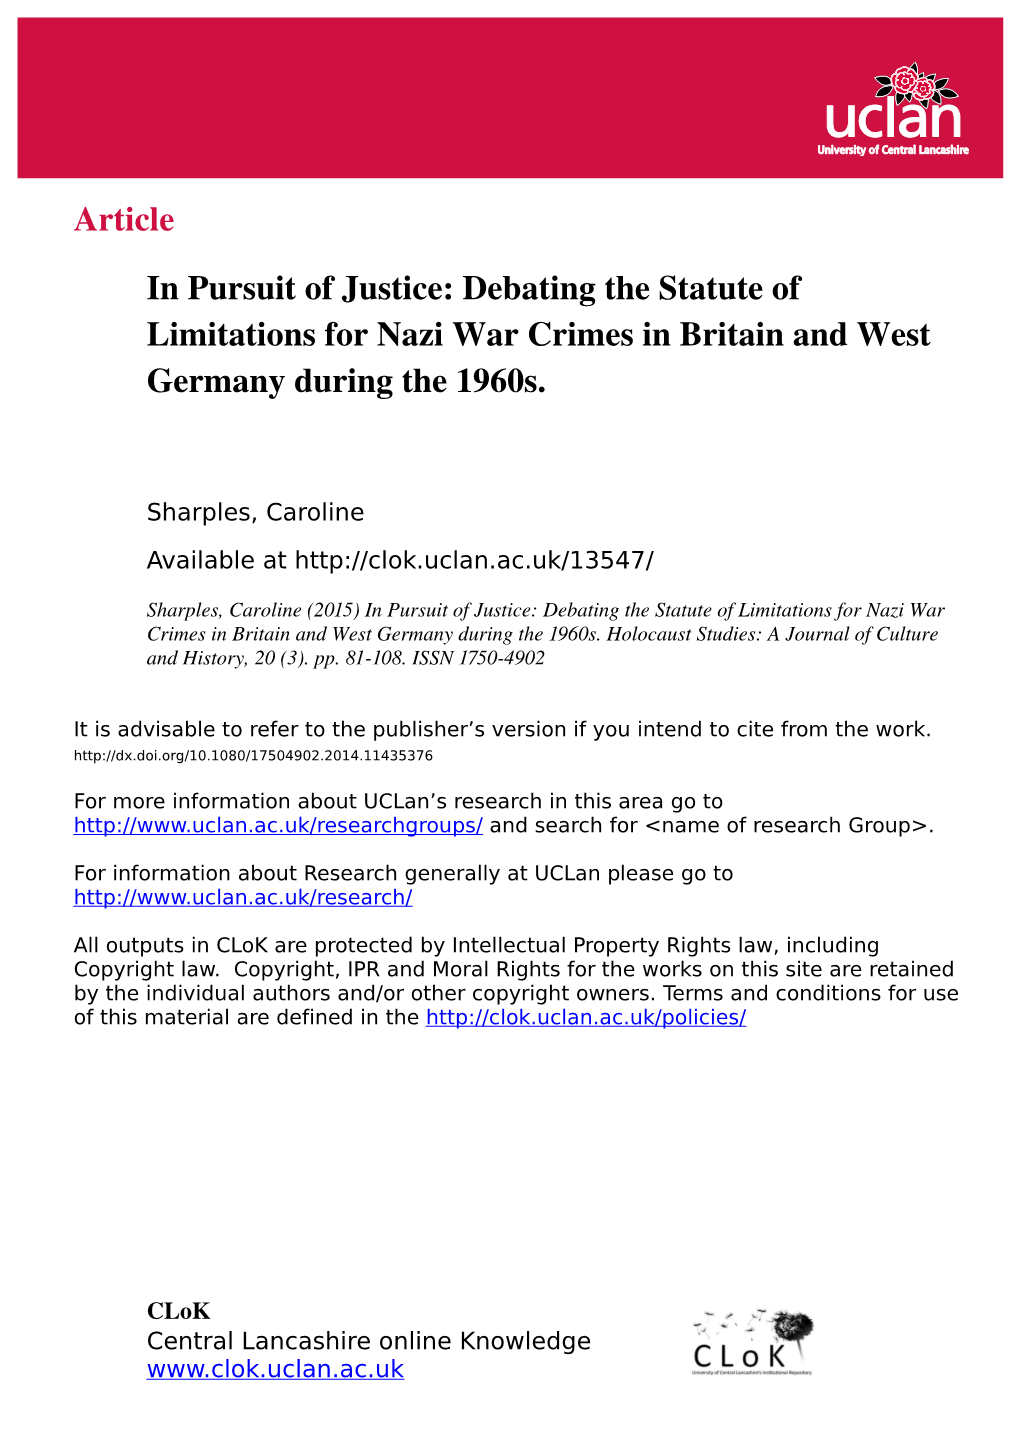 Debating the Statute of Limitations for Nazi War Crimes in Britain and West Germany During the 1960S